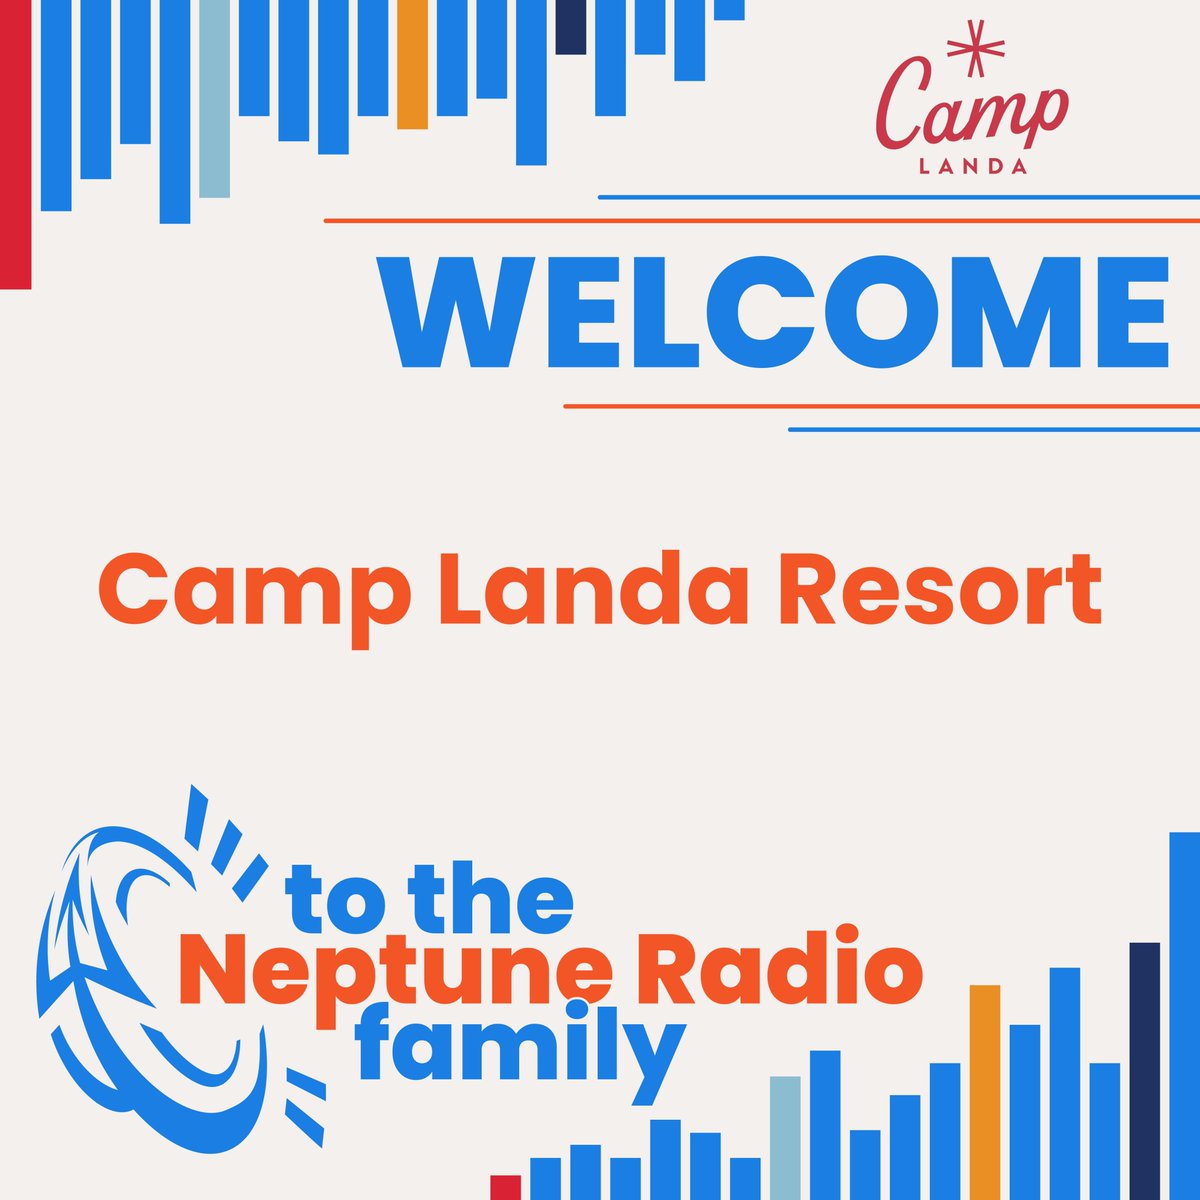 Camp Landa Resort in Texas is now a Neptune Radio partner! We’re excited to elevate the experience for your guests with 100% lyric-safe music and a professional radio sound they’ll love! Welcome to the Neptune family, Camp Landa Resort!